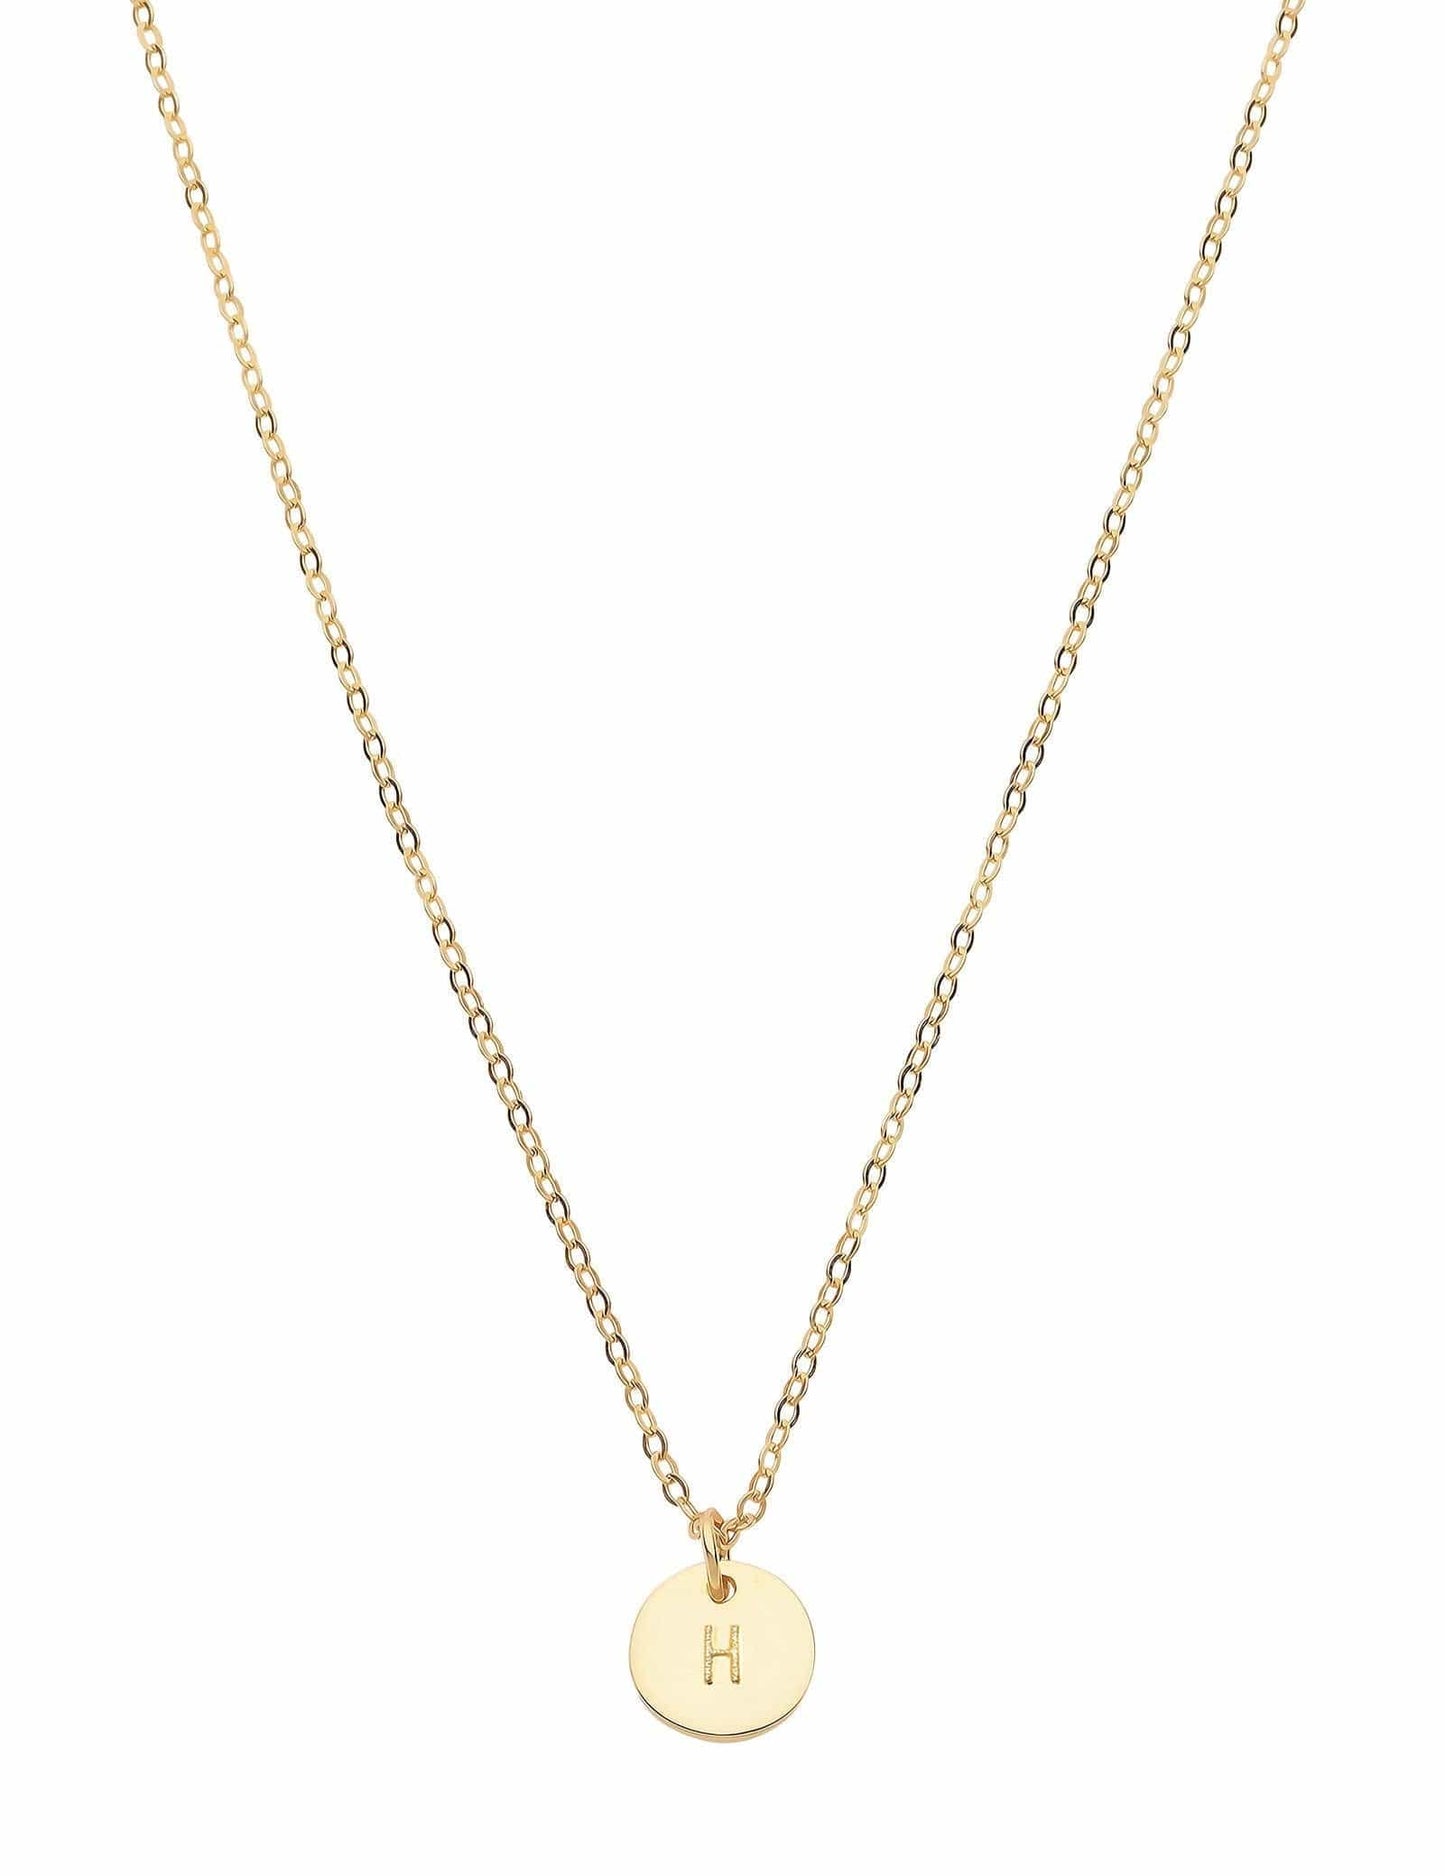 Dear Addison Yellow Gold Letter H Necklace